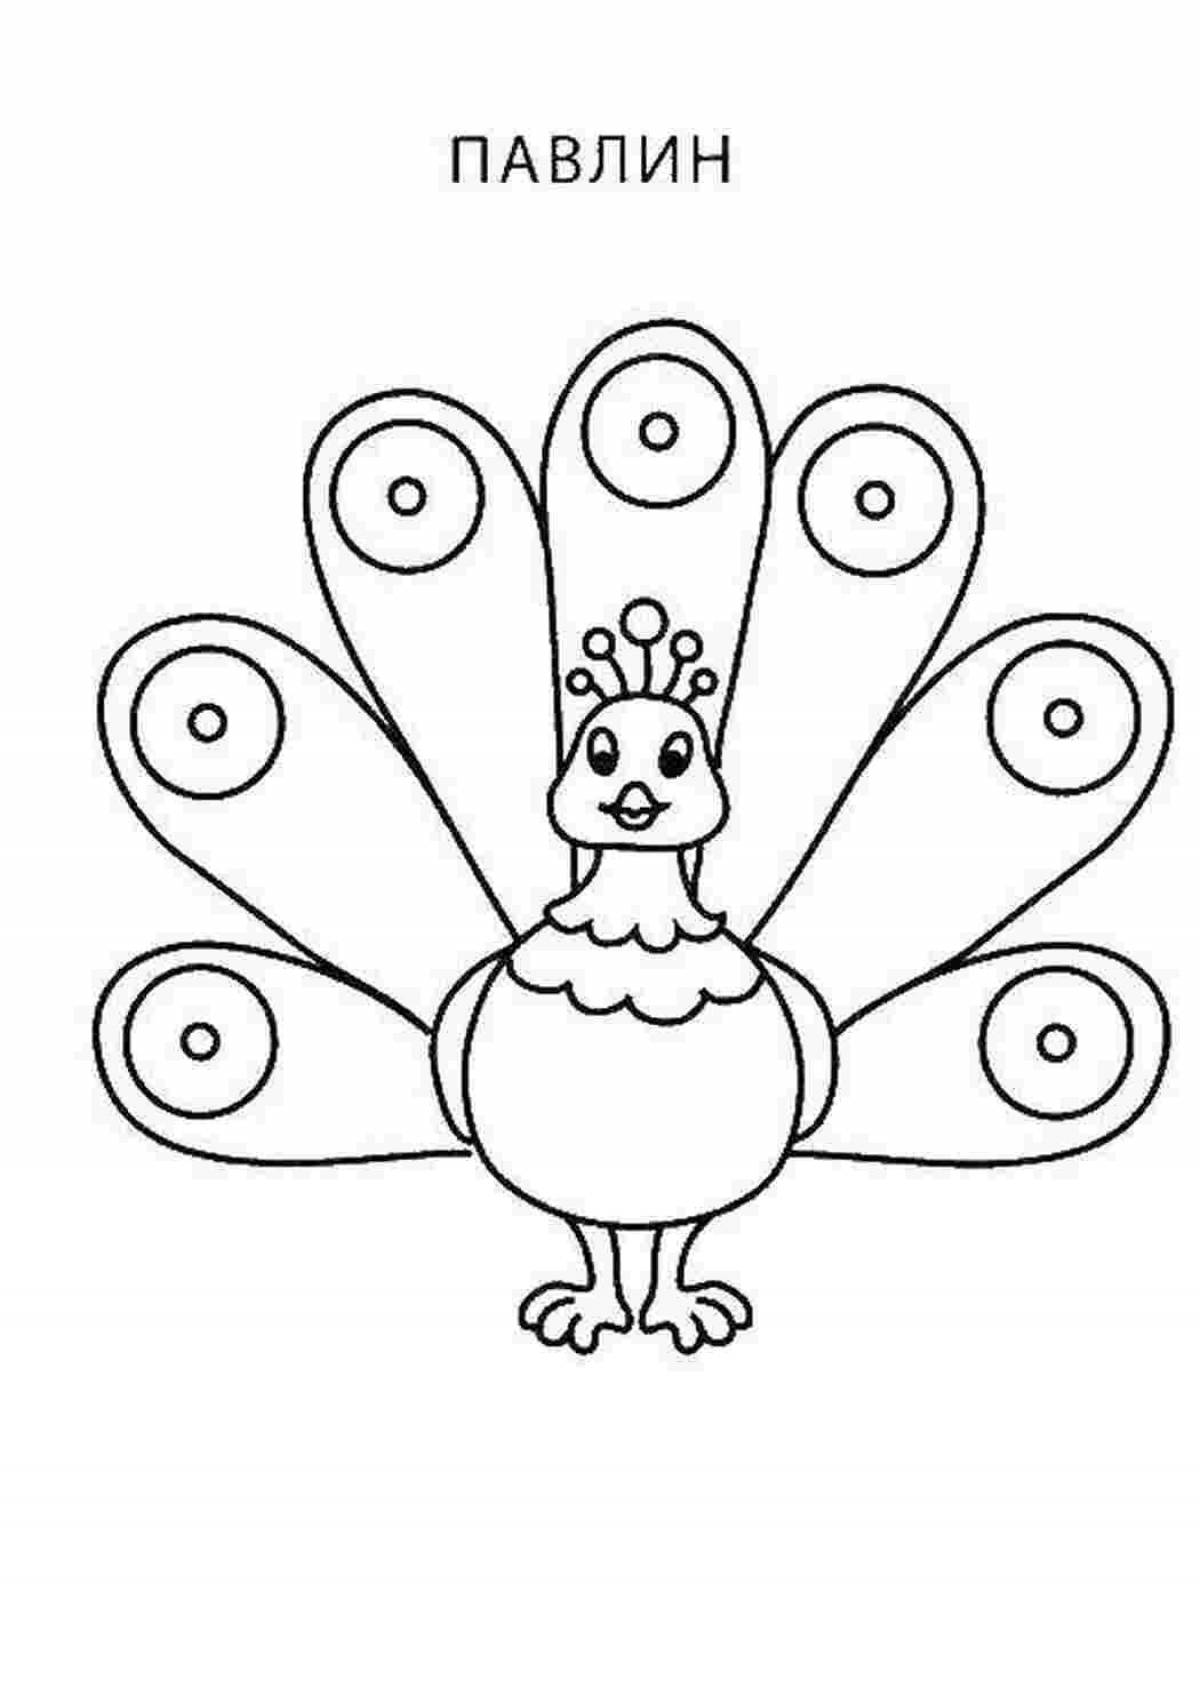 Adorable peacock coloring book for kids